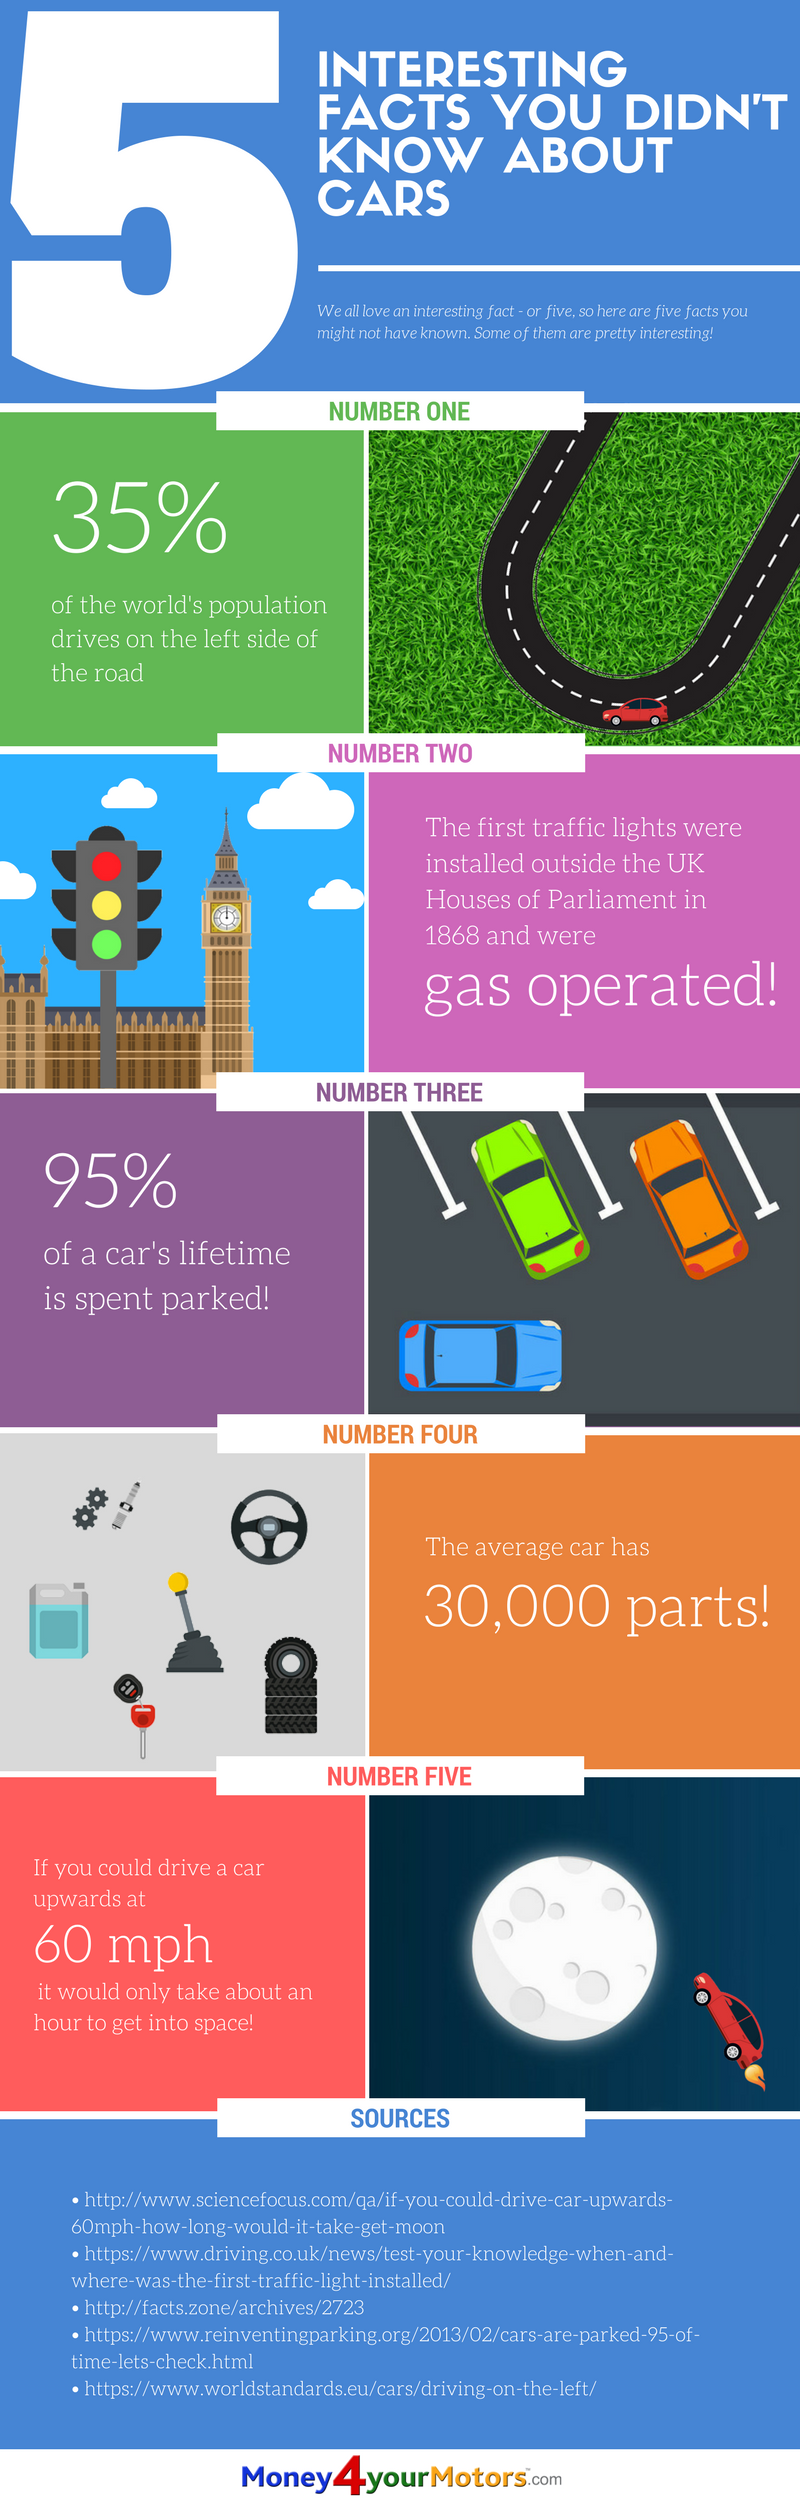 Interesting facts about Cars Infographic